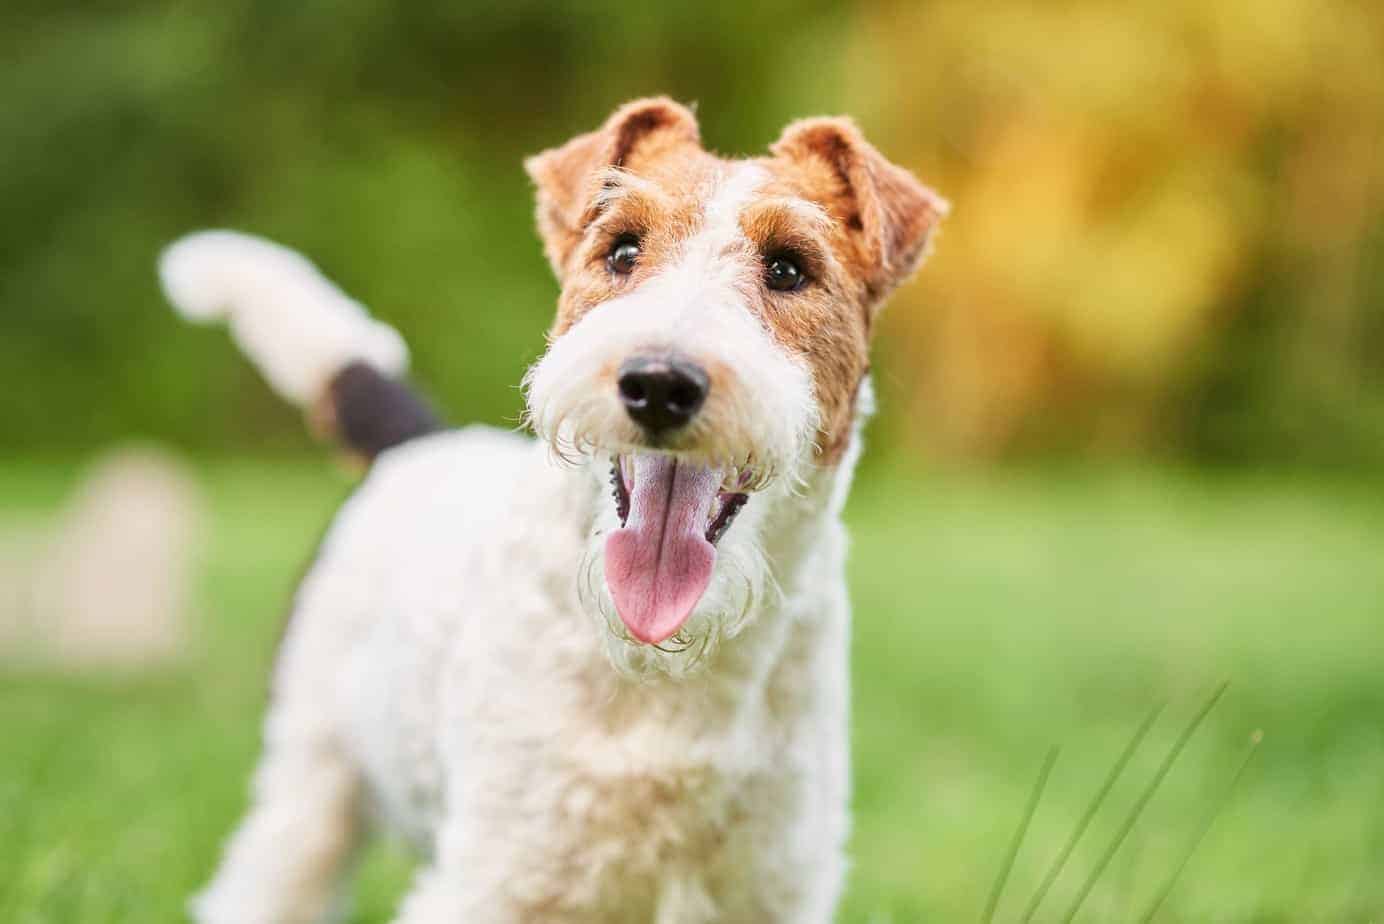 7 in 10 People Can’t Identity More Than 15 of These Dog Breeds 🐕 — Let’s See If You Can Do It Wire Fox Terrier